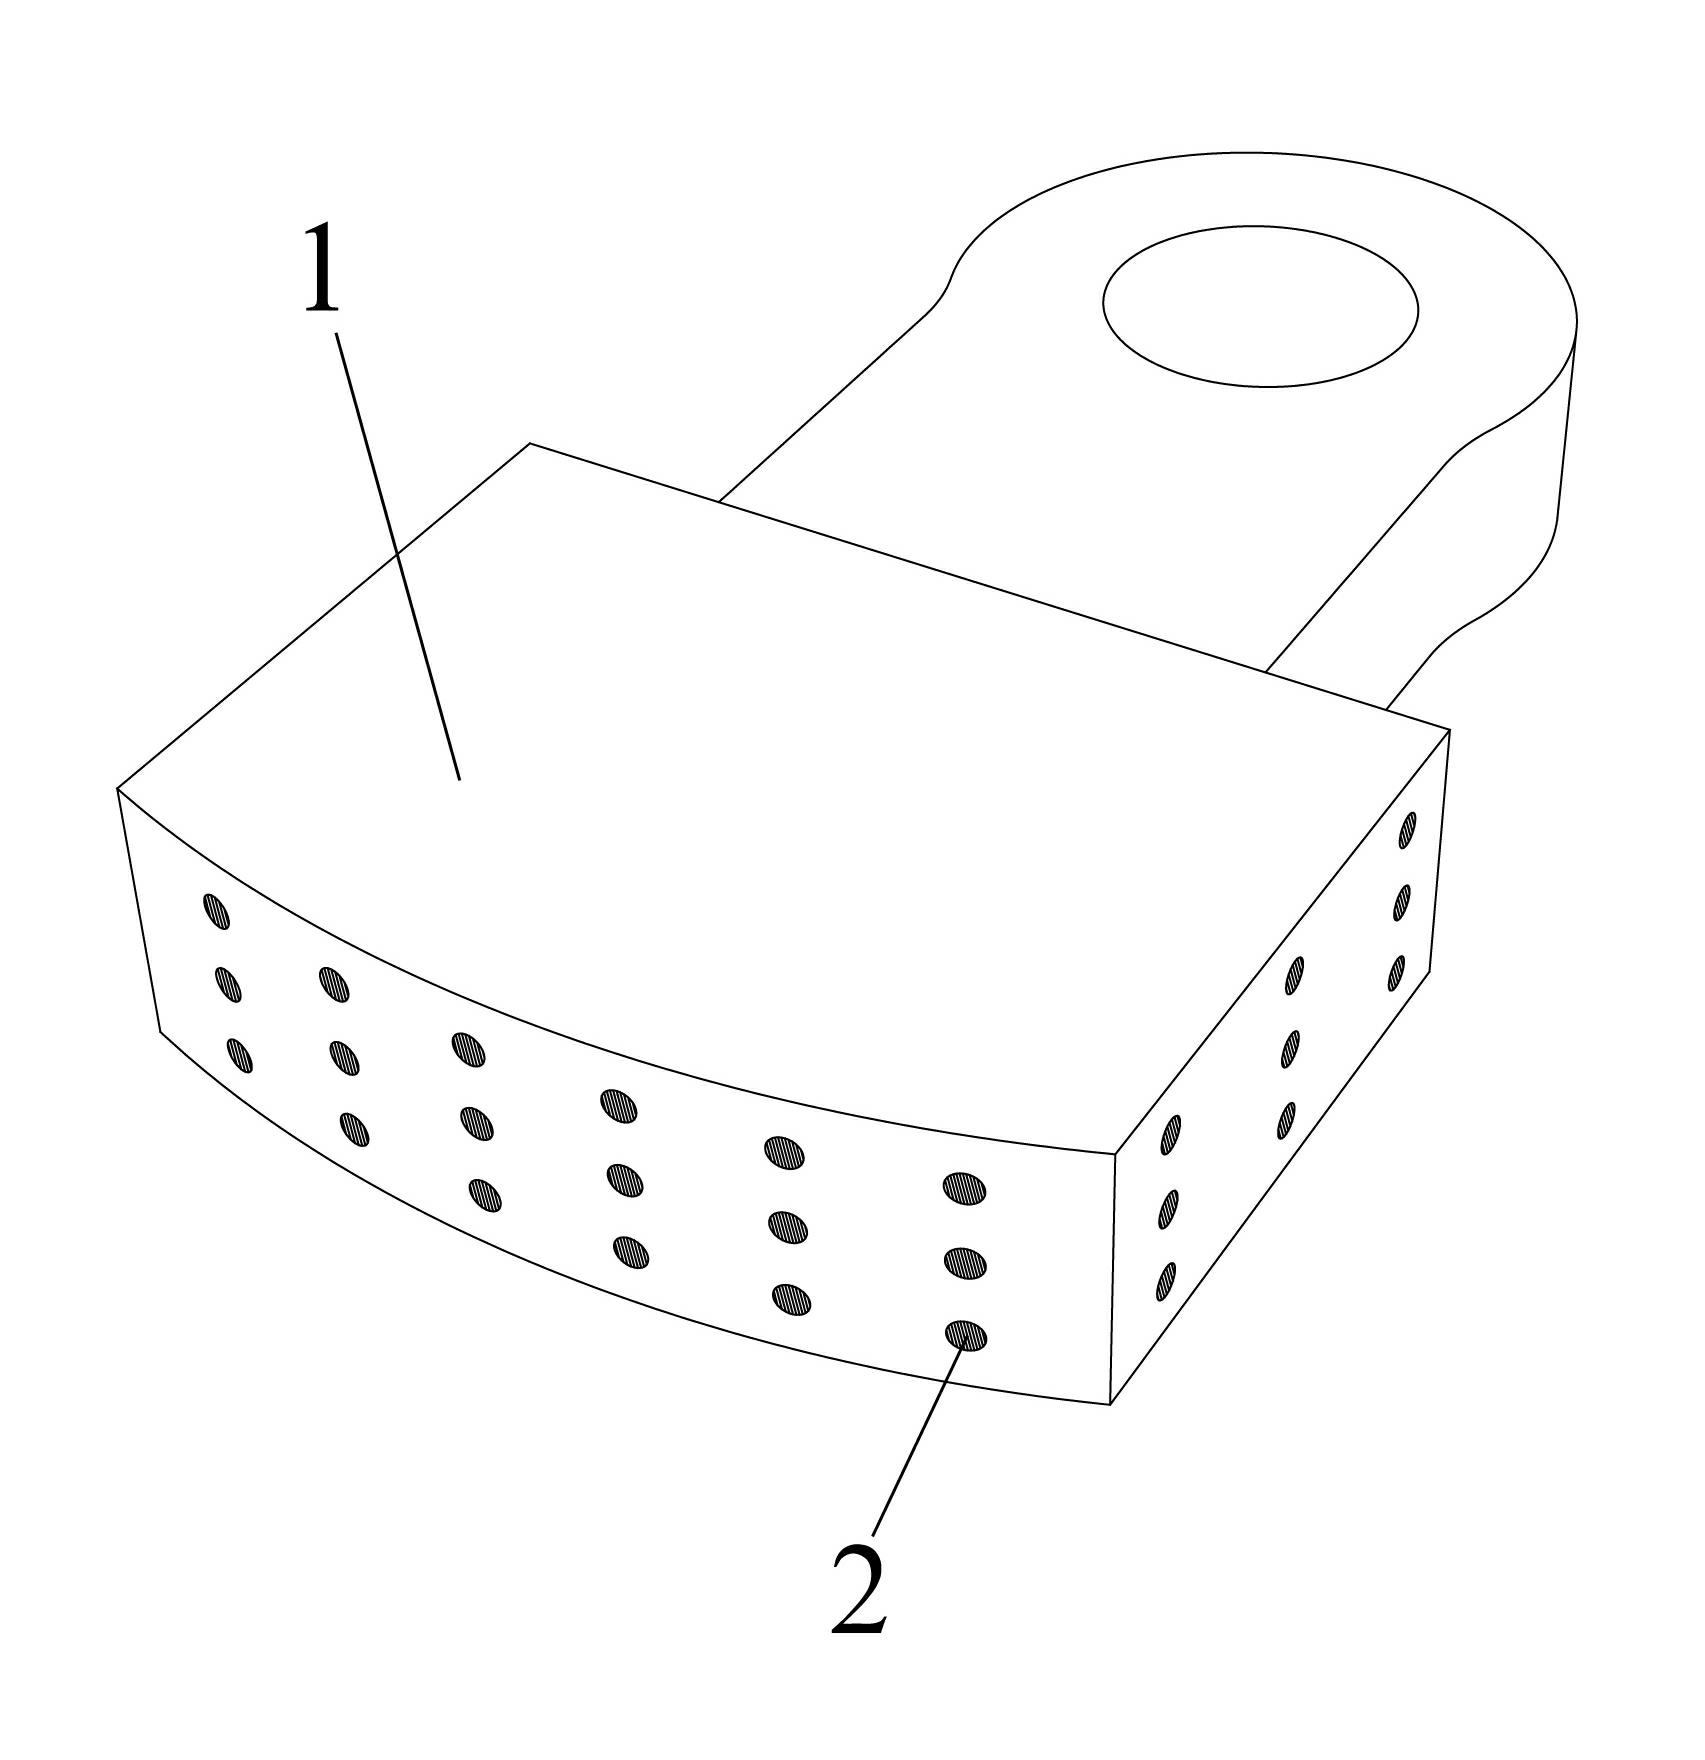 Method of in situ synthetic steel bond hard alloy casting composite hammerhead and hammerhead